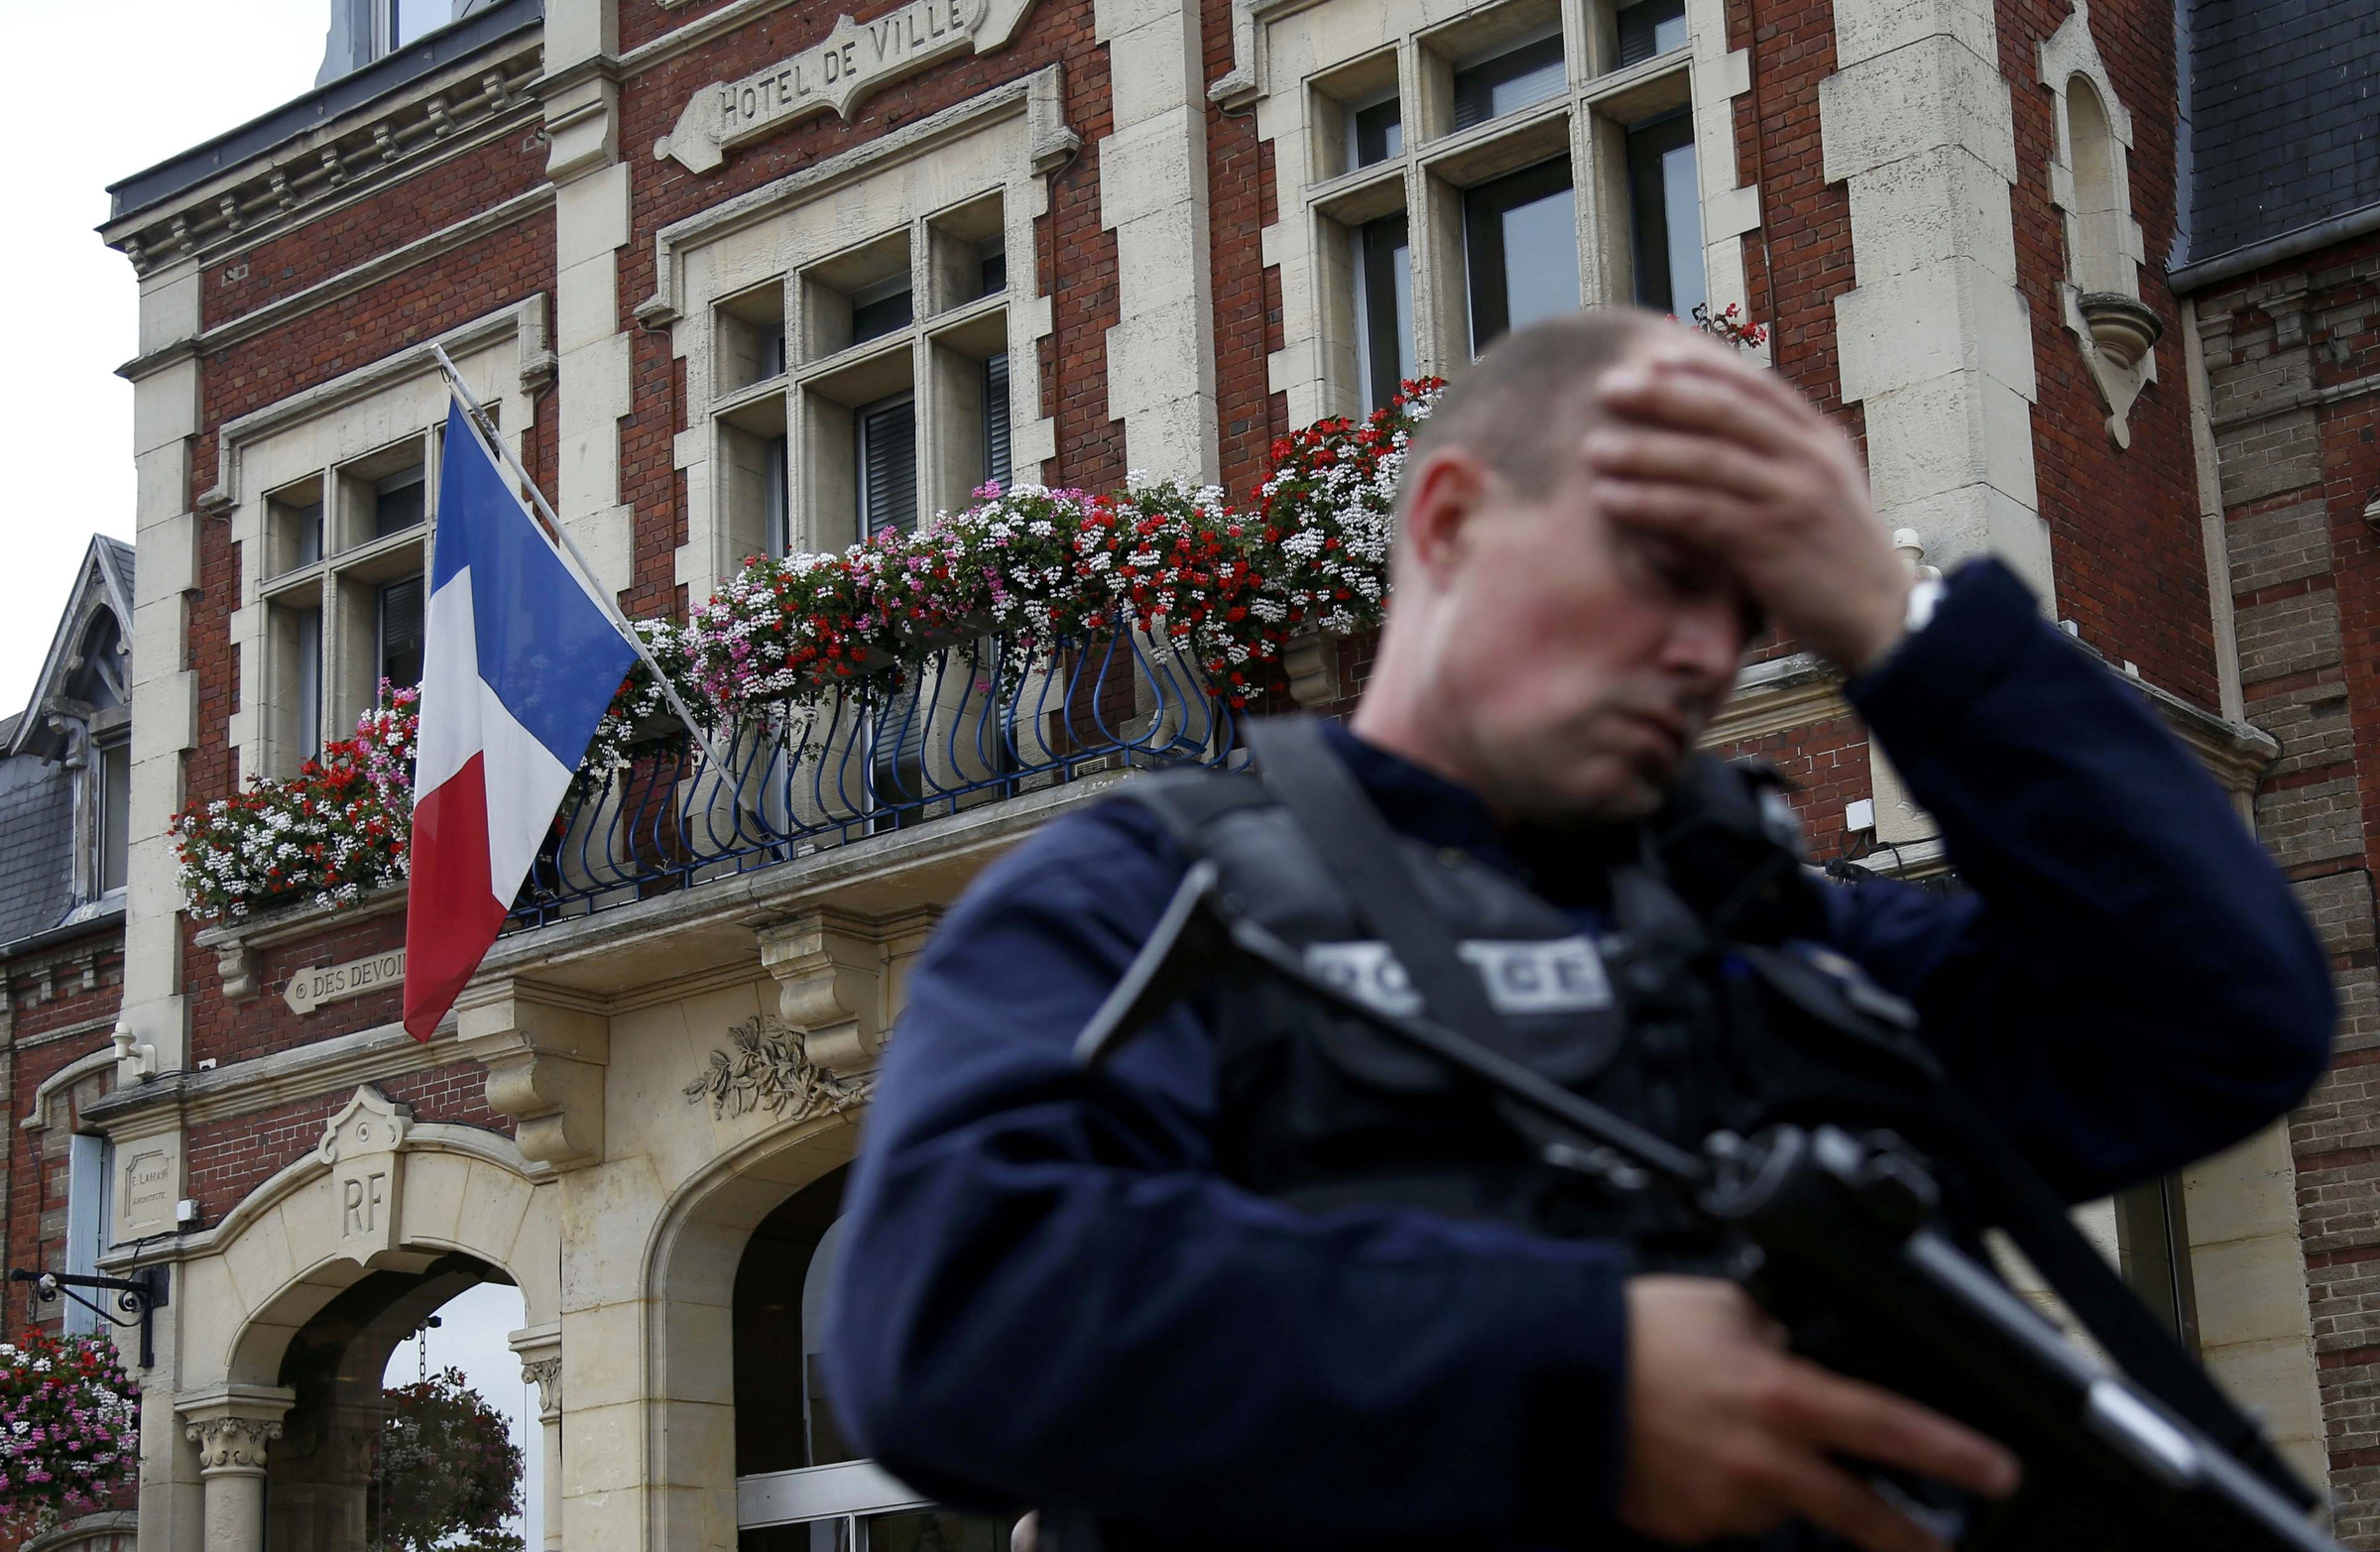 A policeman reacts as he secures a position in front of city hall after two assailants killed 84-year-old Father Jacques Hamel and took five people hostage during a weekday morning Mass  at the church in Saint-Etienne-du-Rouvray, France, near Rouen July 26. (CNS photo/Pascal Rossignol/Reuters) 